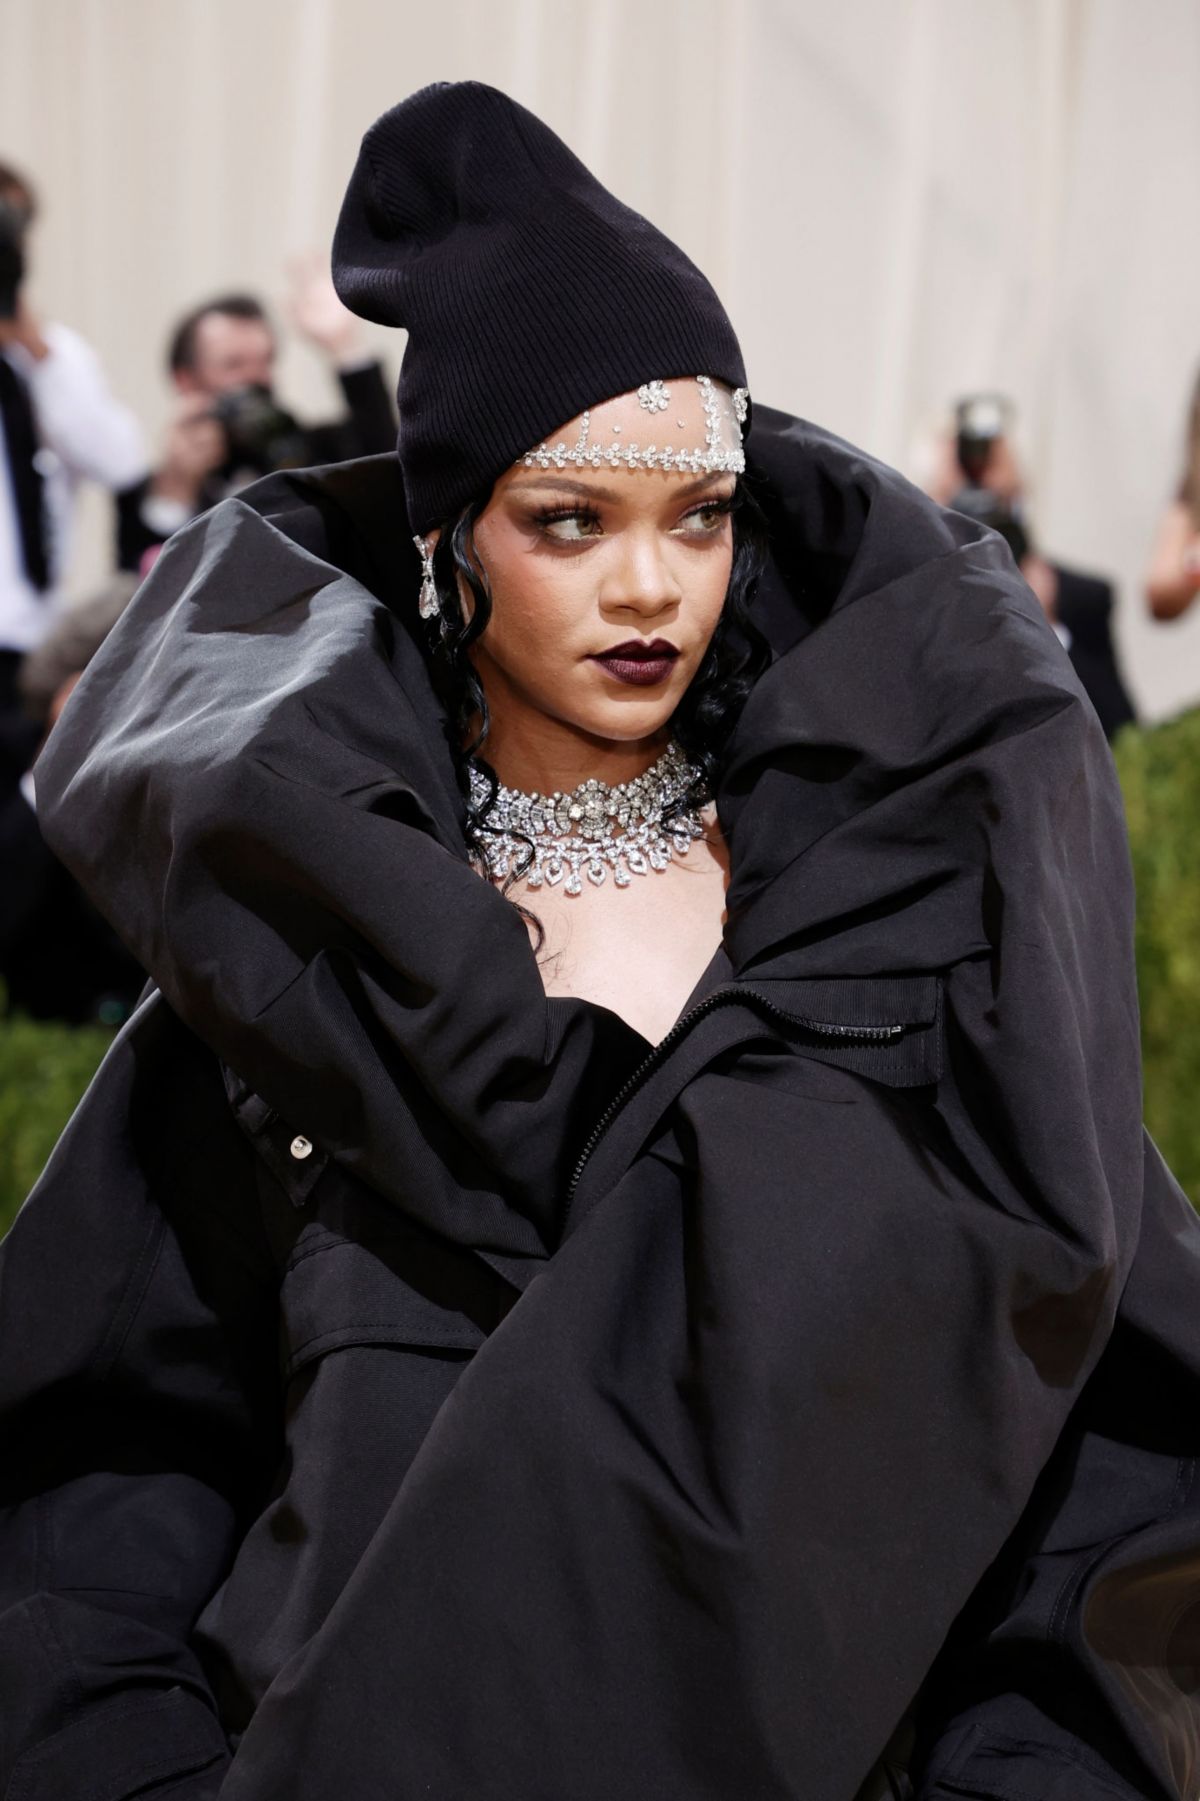 RIHANNA and Asap Rocky at 2021 Met Gala in New York 09/13/2021 – HawtCelebs